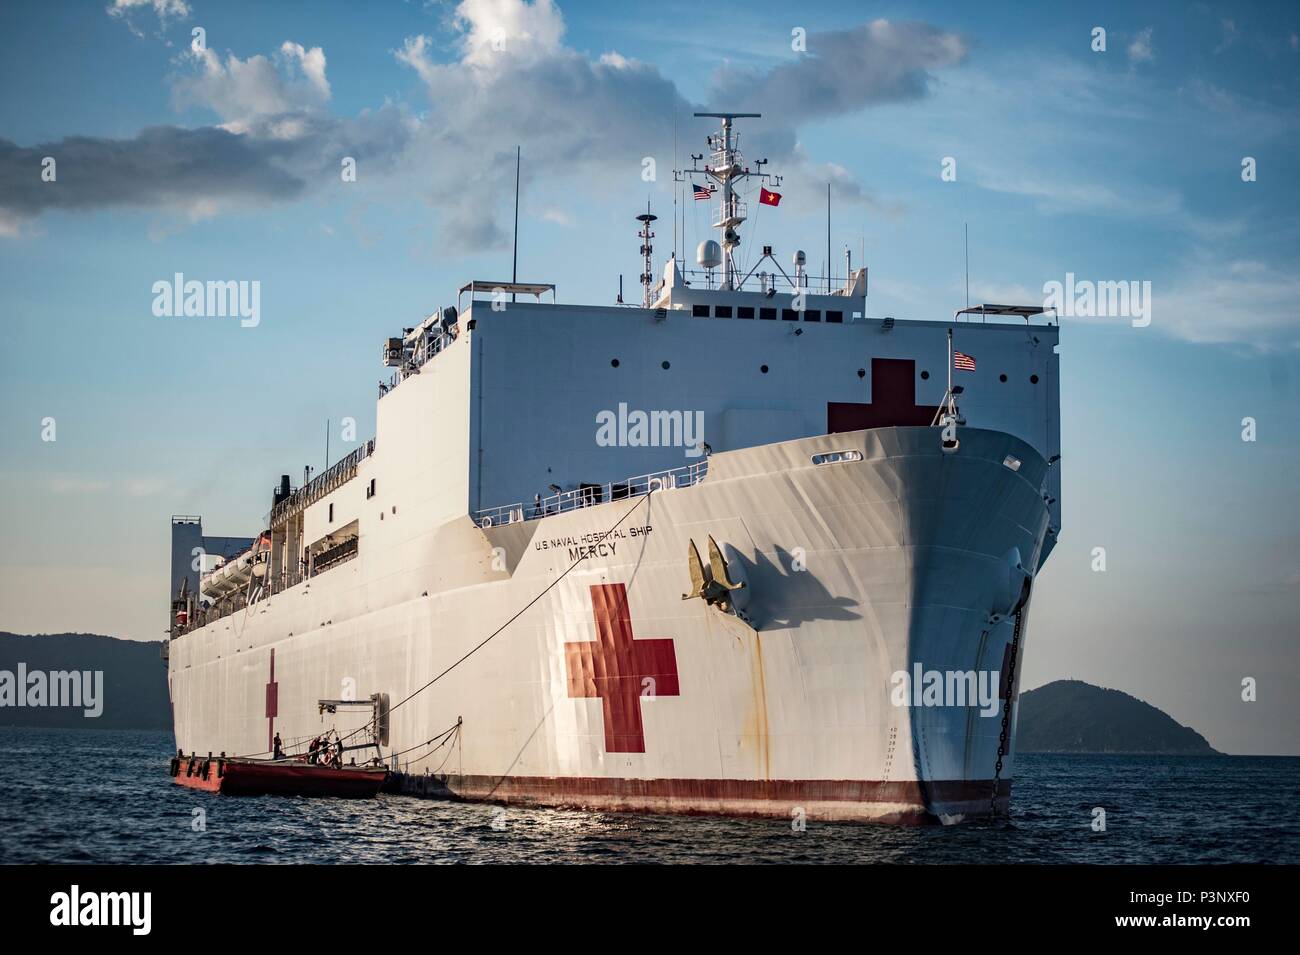 160719-N-QW941-650 DA NANG, Vietnam (July 19, 2016) Hospital ship USNS Mercy (T-AH 19) sits anchored off the coast of Da Nang, Vietnam during its third mission stop of Pacific Partnership 2016. Mercy is joined in Da Nang by JS Shimokita (LST-4002) and Vietnam People's Navy ship Khánh Hóa for Pacific Partnership. Partner nations will work side-by-side with local organizations to conduct cooperative health engagements, community relation events and subject matter expert exchanges to better prepare for natural disaster or crisis. (U.S. Navy photo by Mass Communication Specialist 3rd Class Trevor  Stock Photo